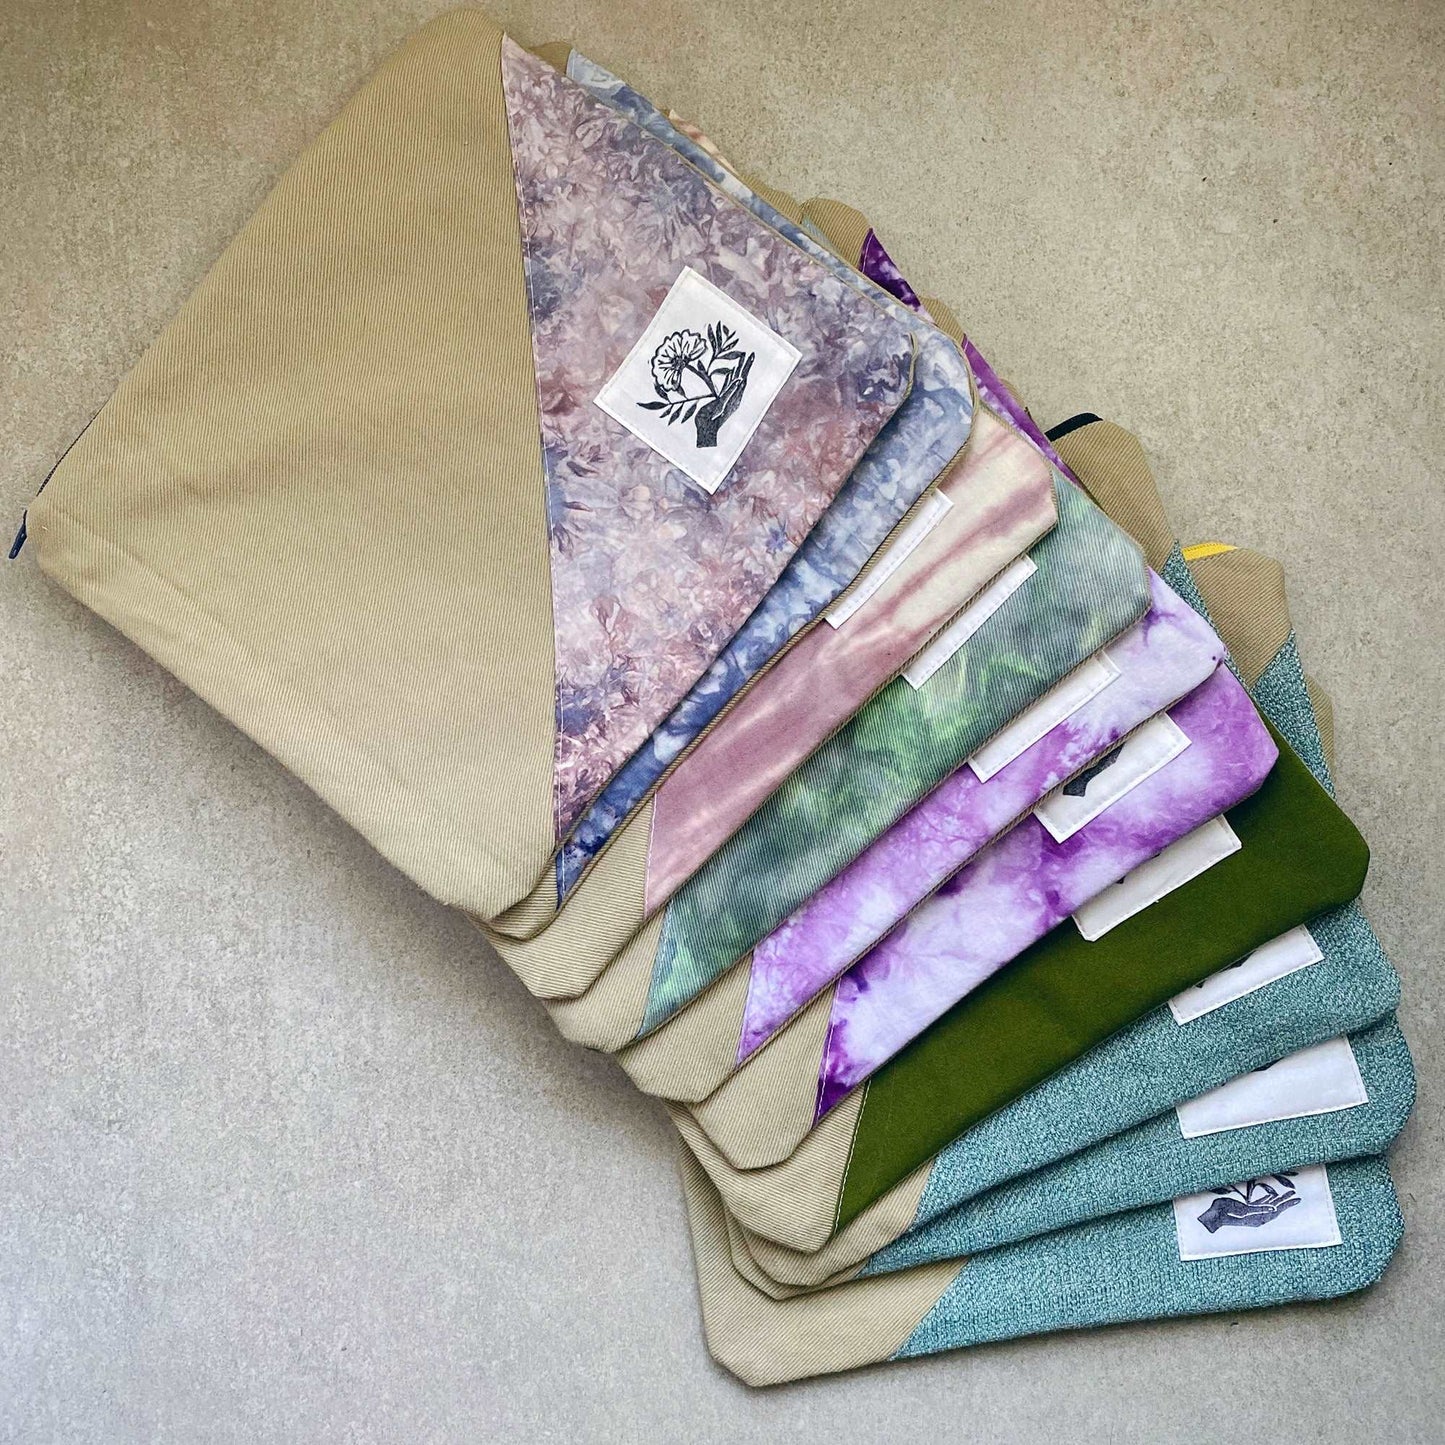 This is a photo of multiple canvas zip bags. Each bag is a little different, with fabric panels made from tie dyed fabric, solid fabric and textured fabric. Each bag includes a handprinted patch made by Sunny Chan of the Etsy shop moonandmountainprint. 